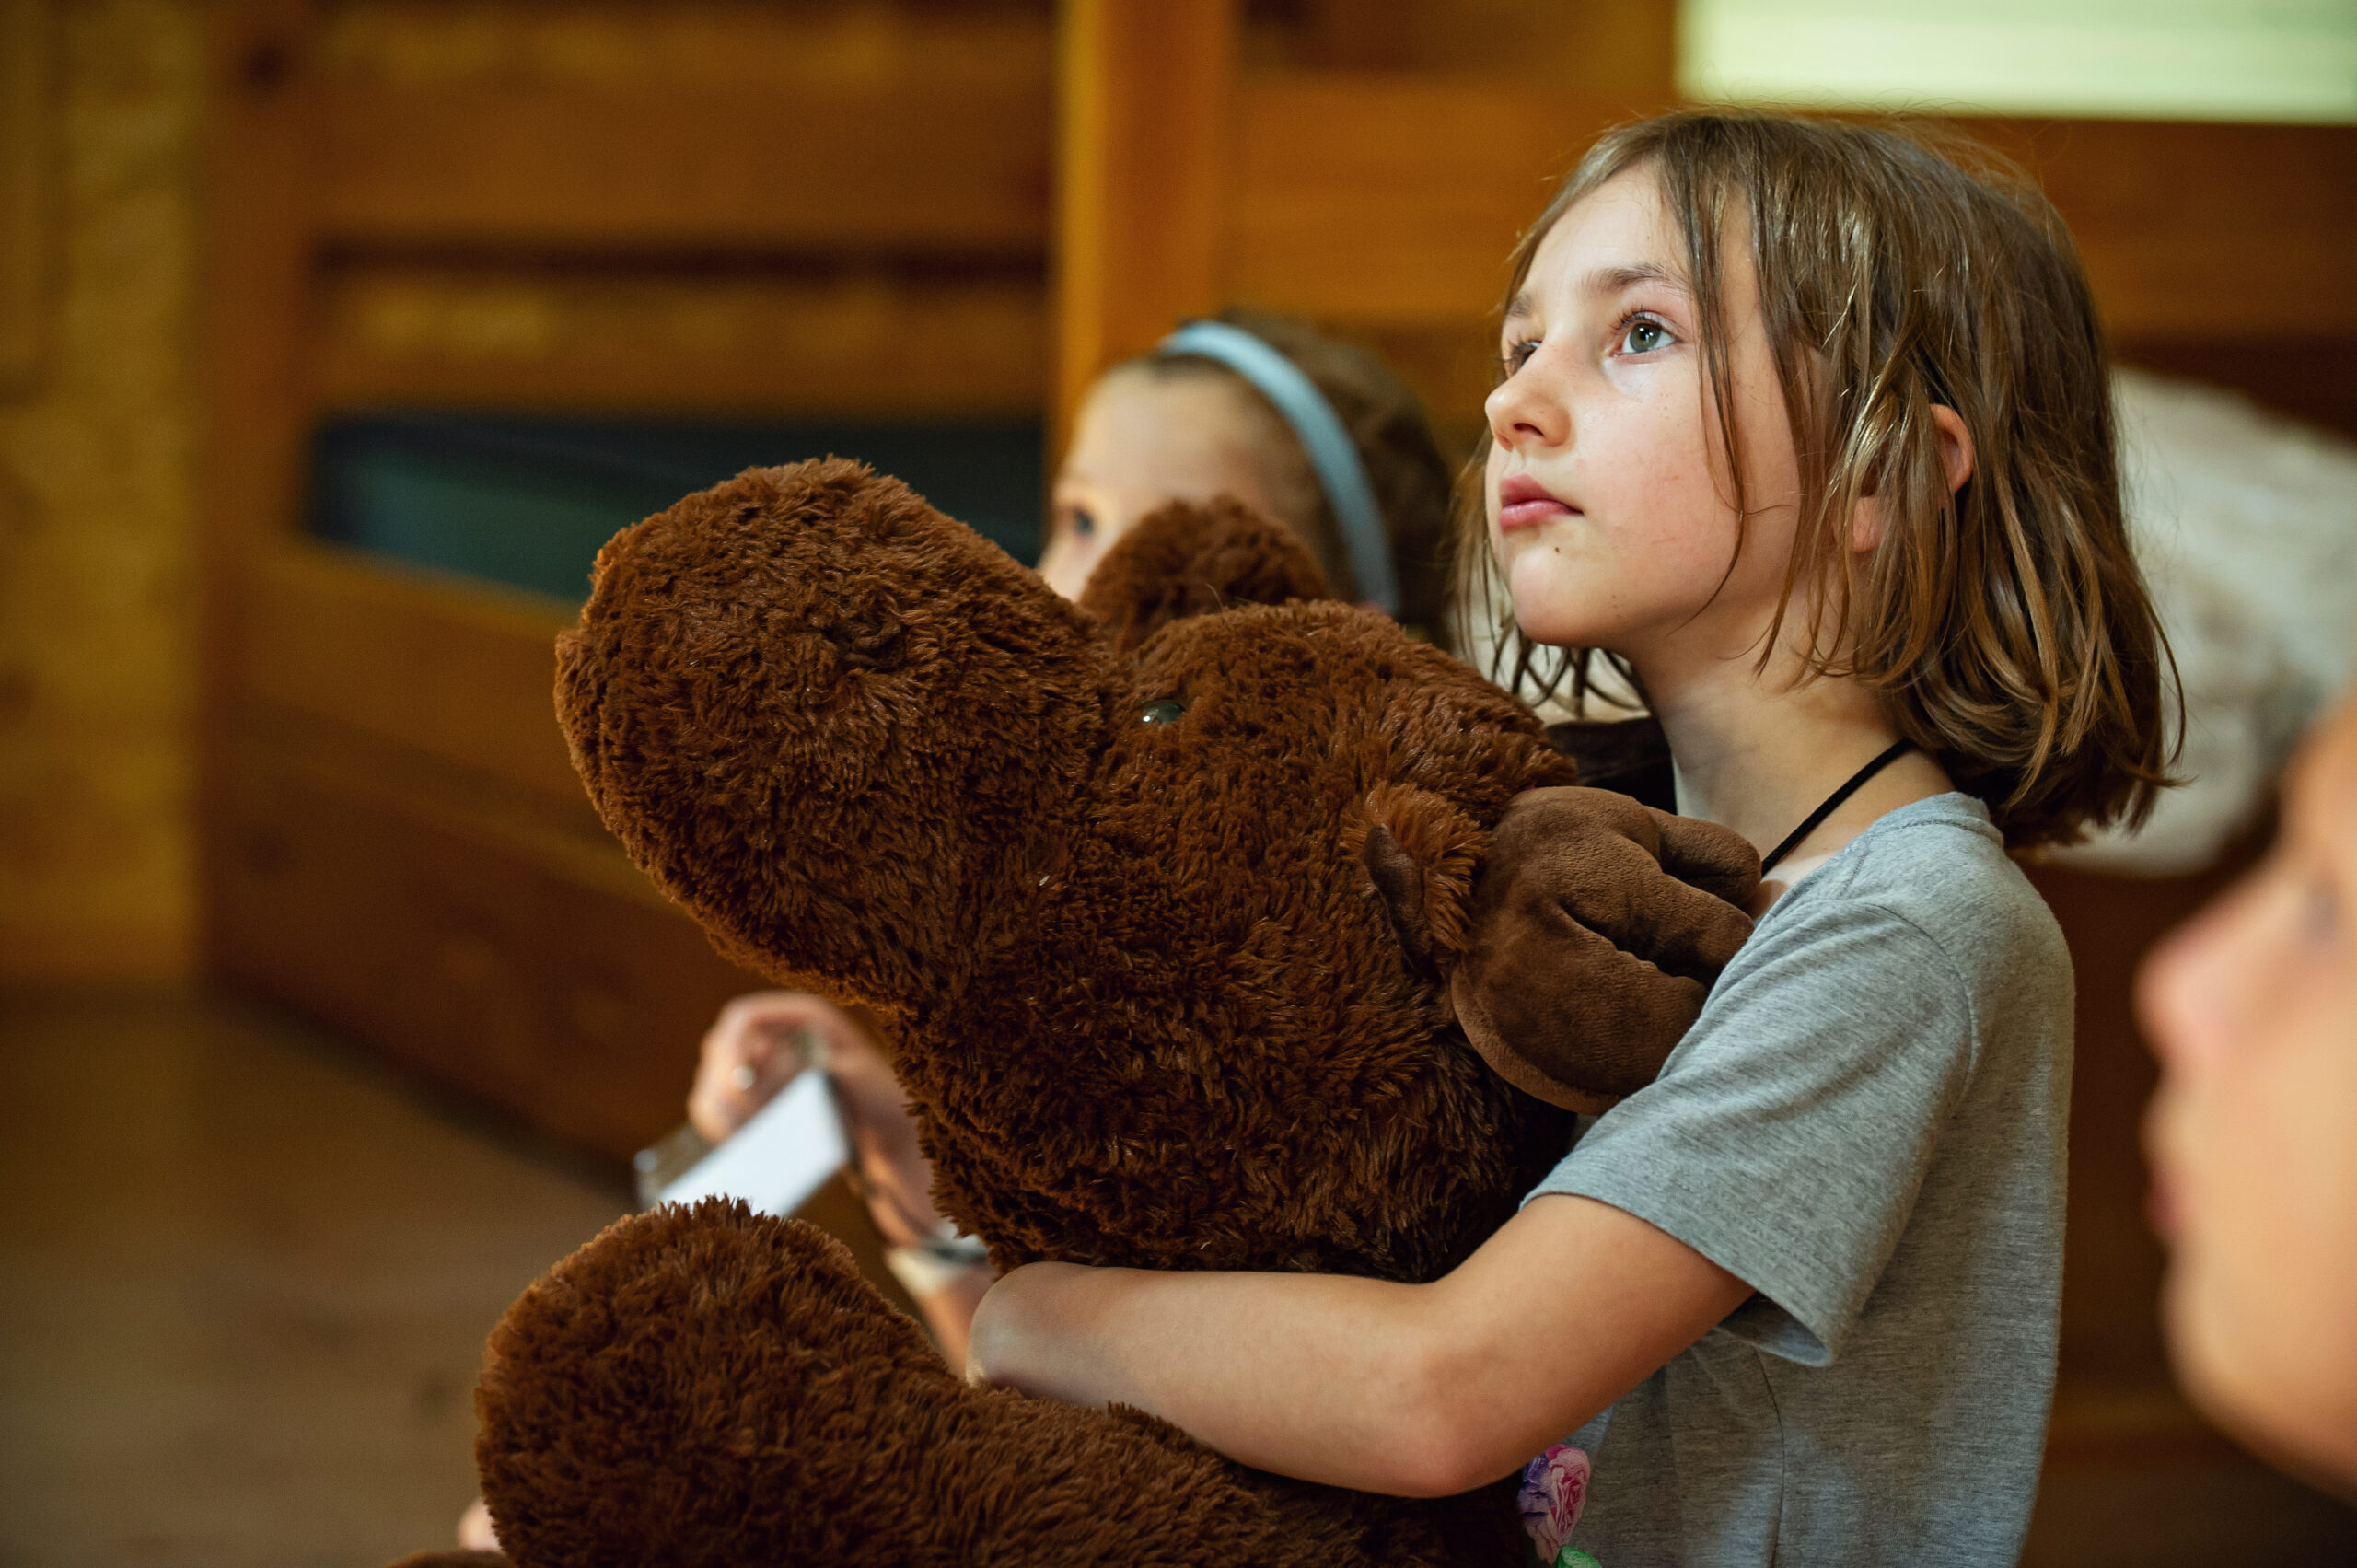 A camper hugging a giant teddy bear listening intently during Cabin Chat